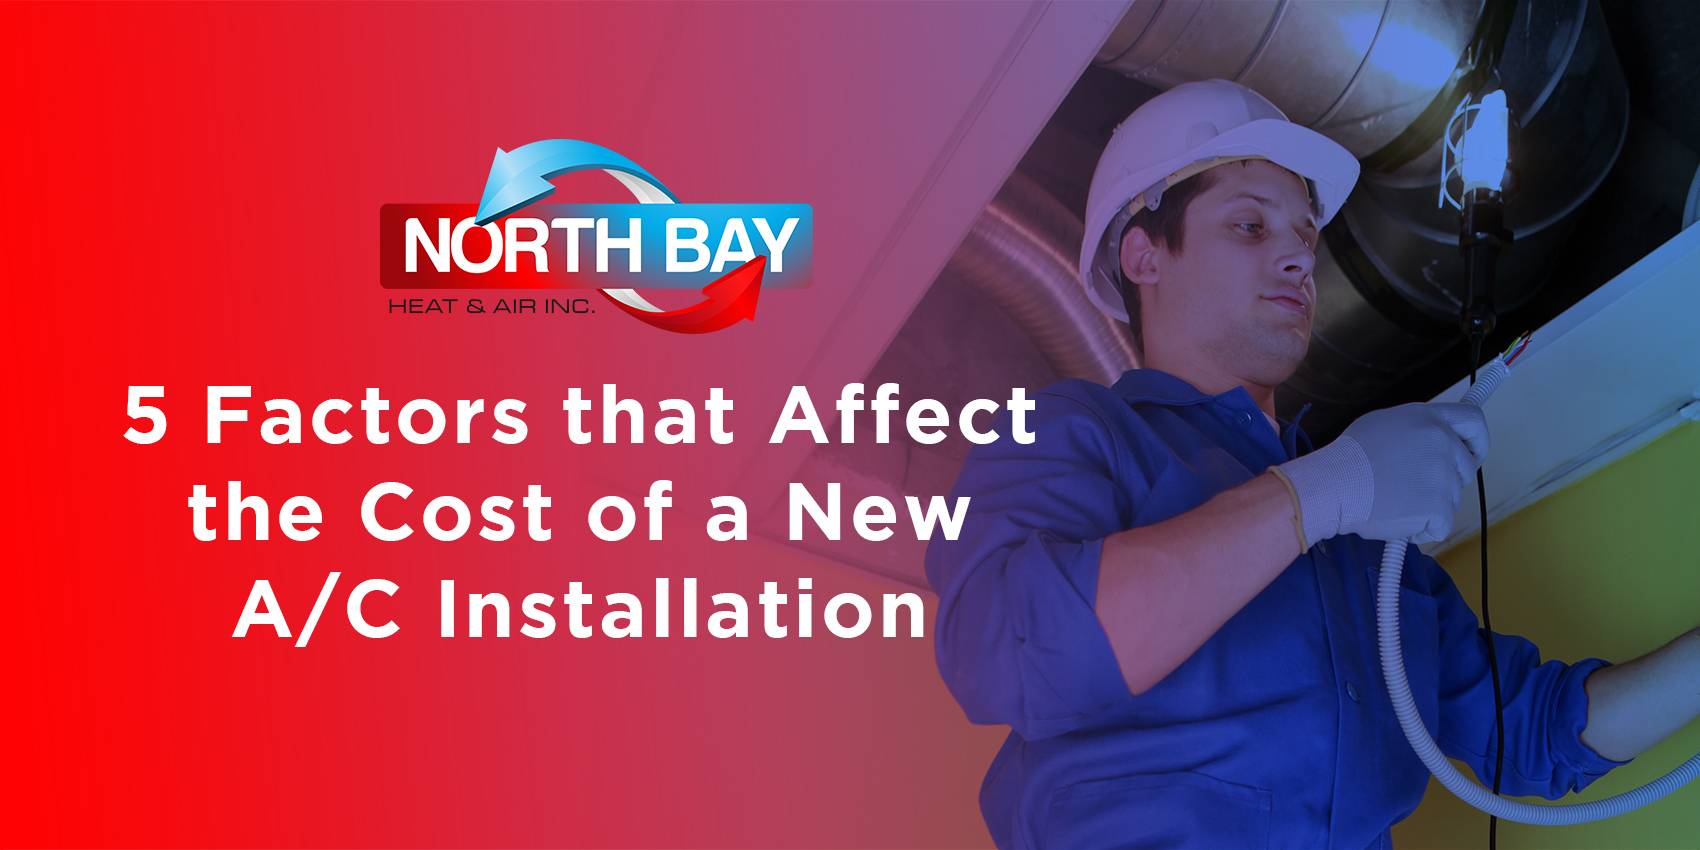 5 Factors that Affect the Cost of a New A/C Installation